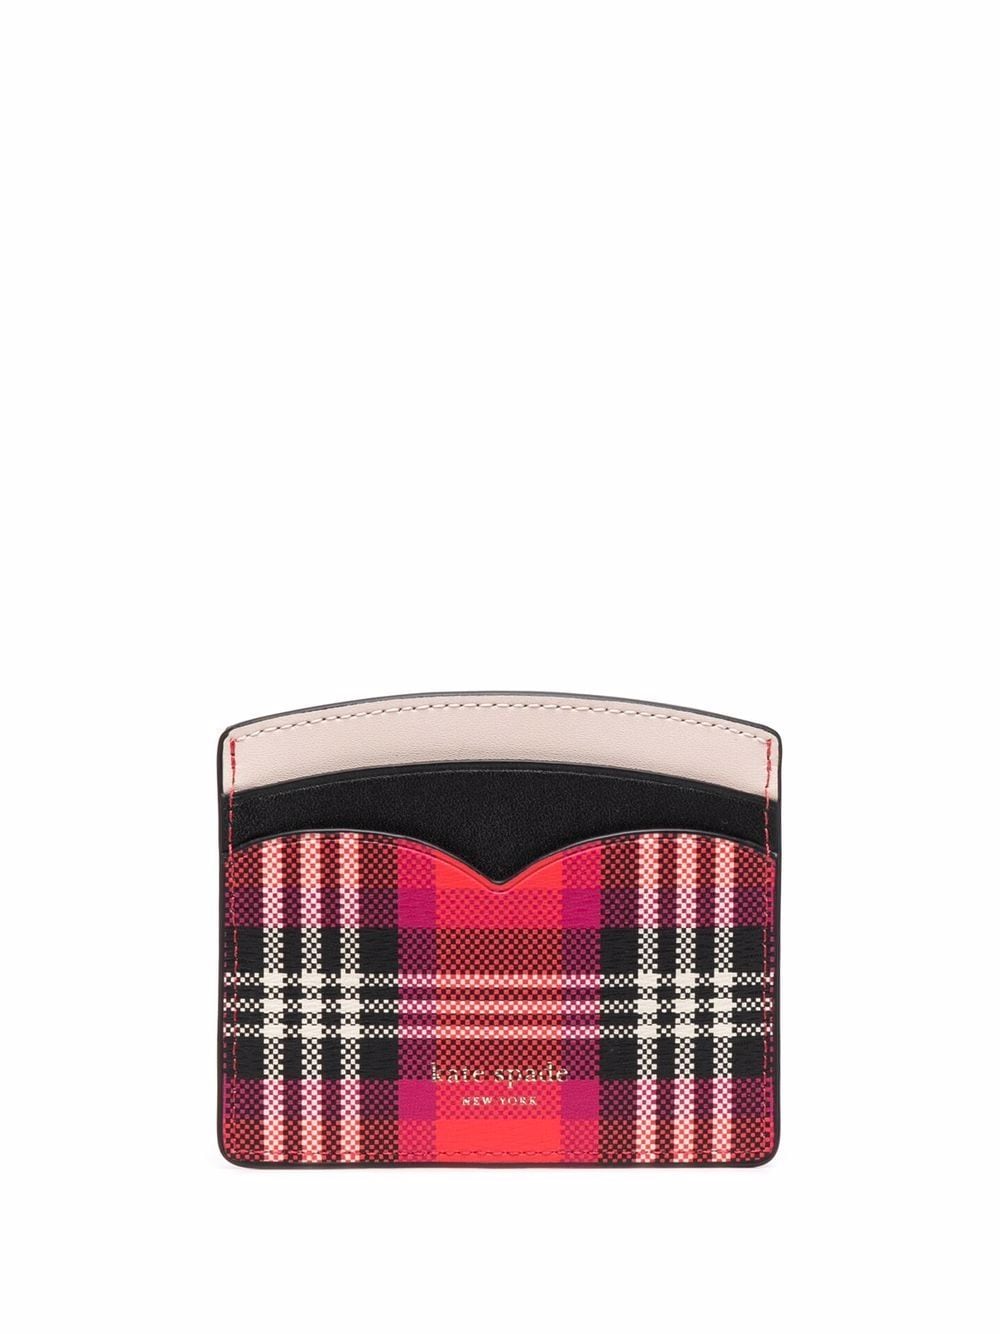 Shop Kate Spade blinx plaid owl cardholder with Express Delivery - FARFETCH